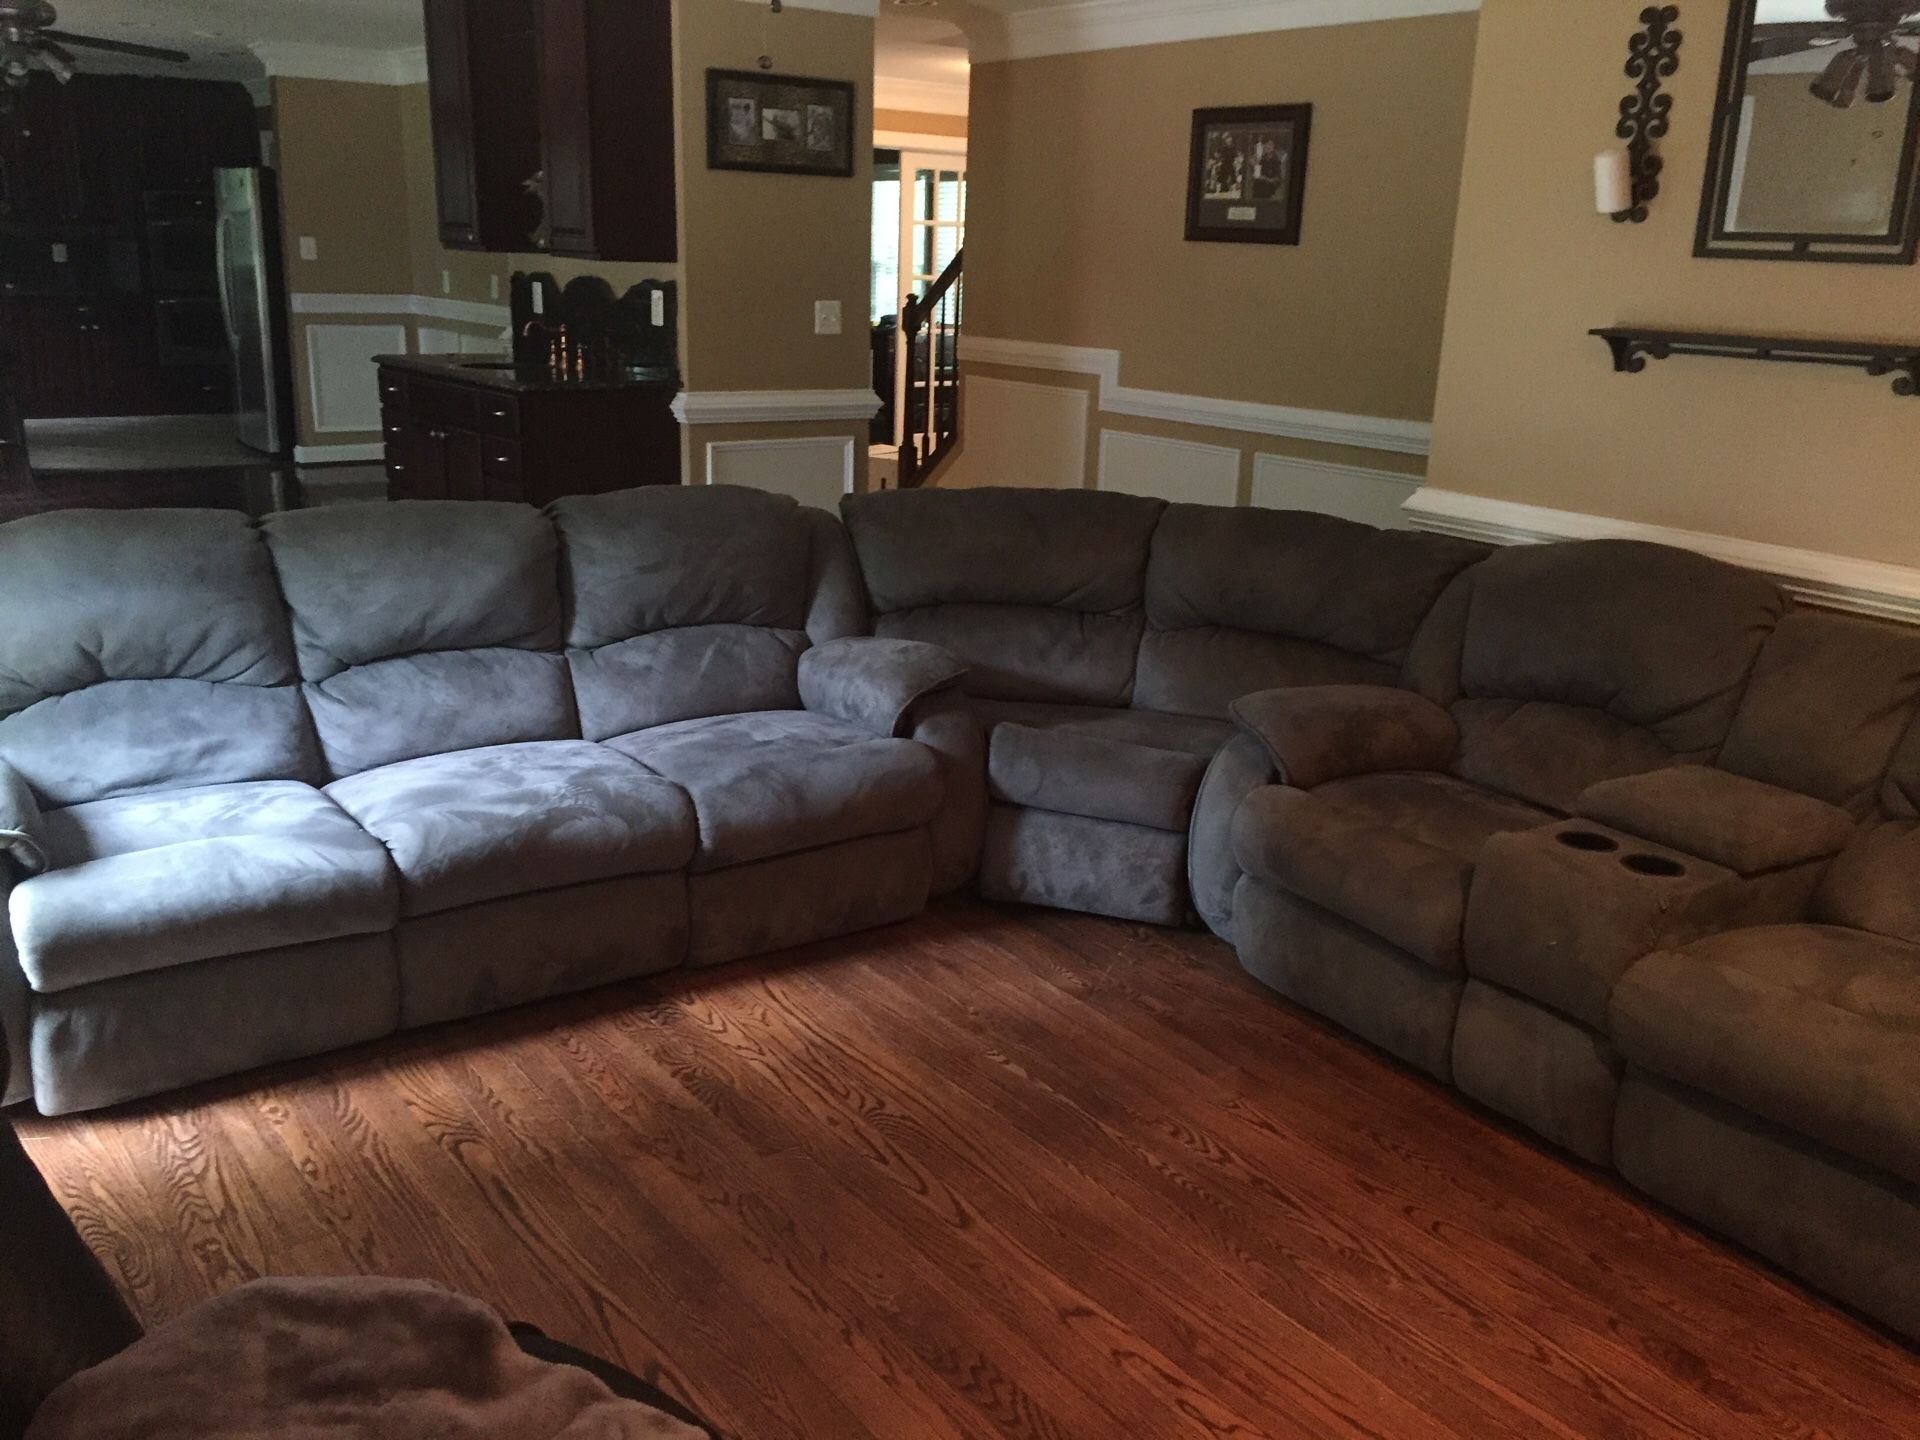 Great couch with recliners on the end